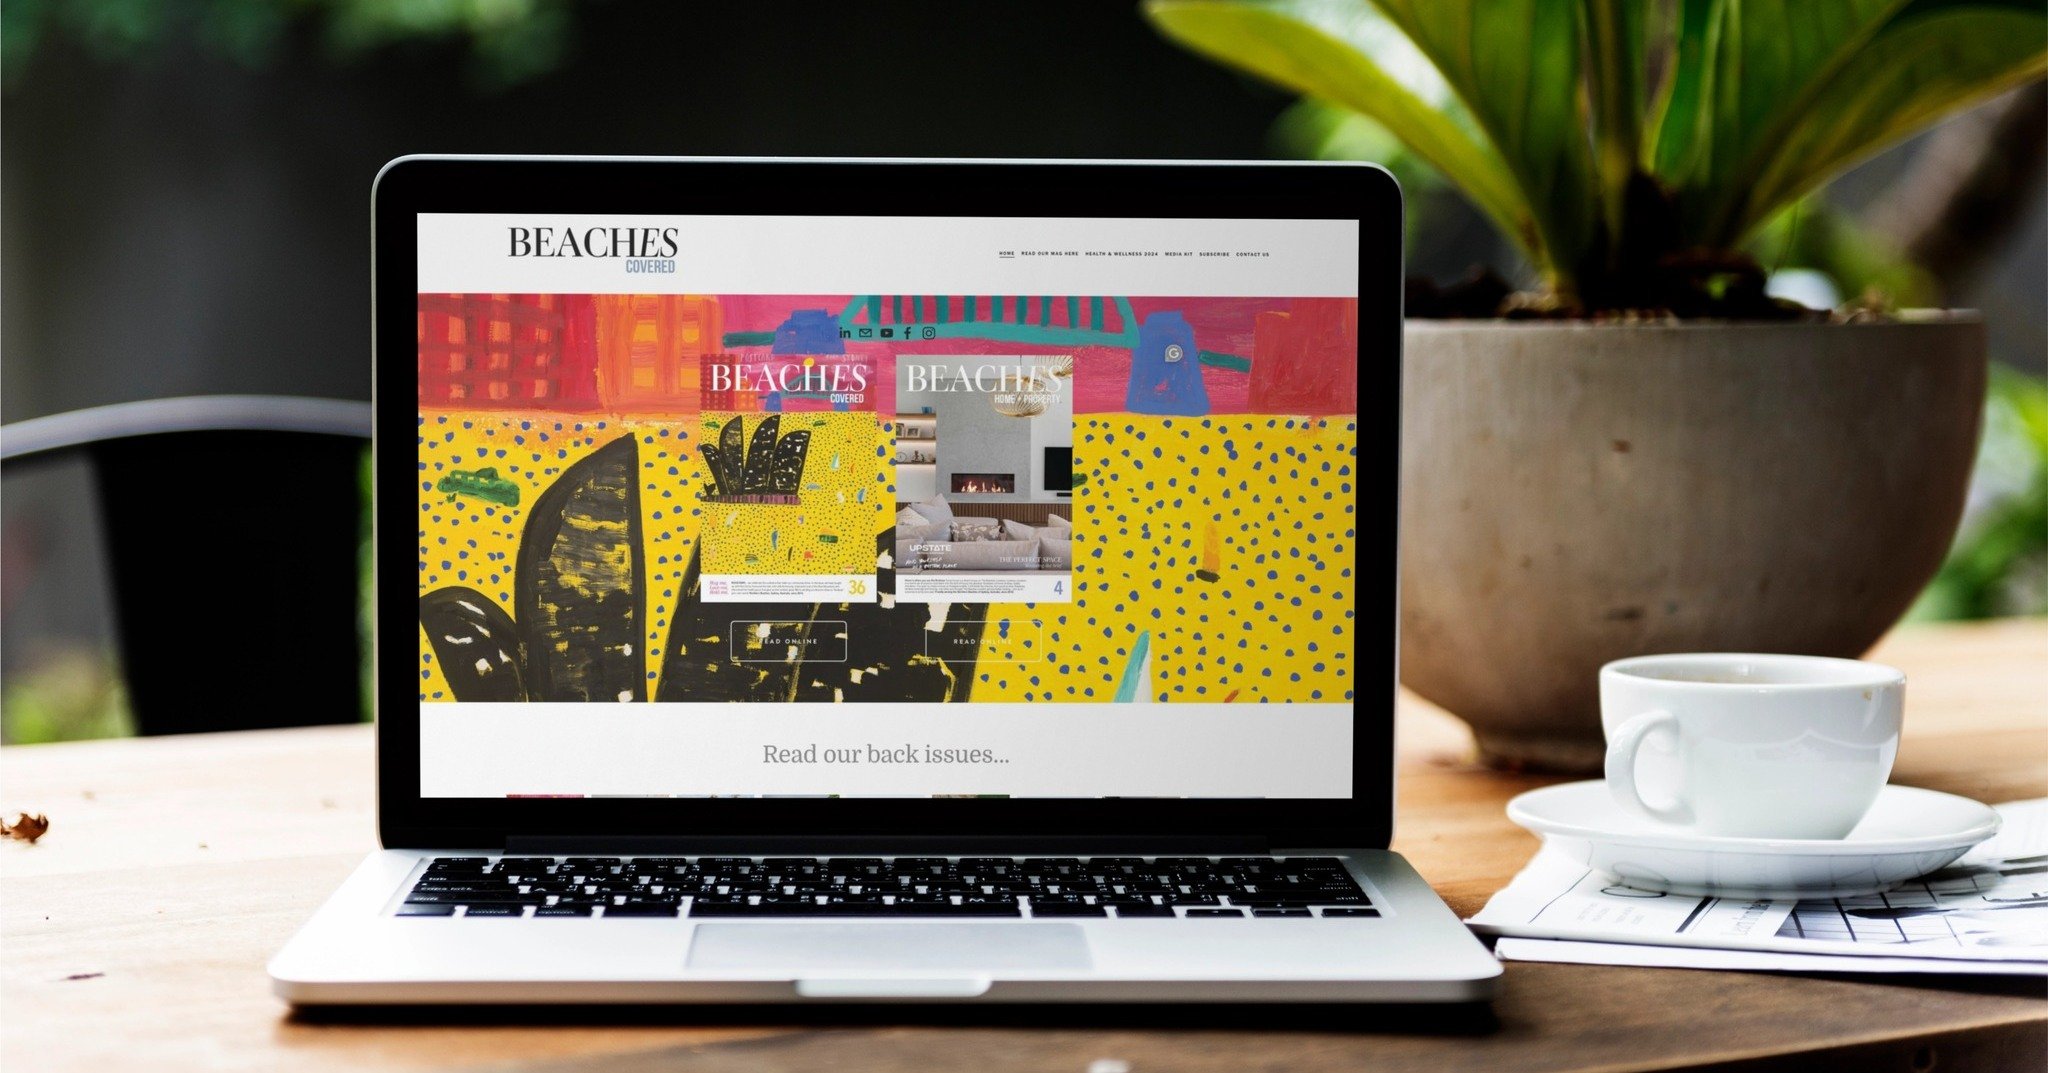 Did you know you can now access Beaches COVERED online?  Get your digital read on with just a tap: https://publuu.com/flip-book/403778/988167

++++

 #northernbeachesbusiness #northernbeachesmums #LoveLocalBusiness #entertainment #beachescovered #lov